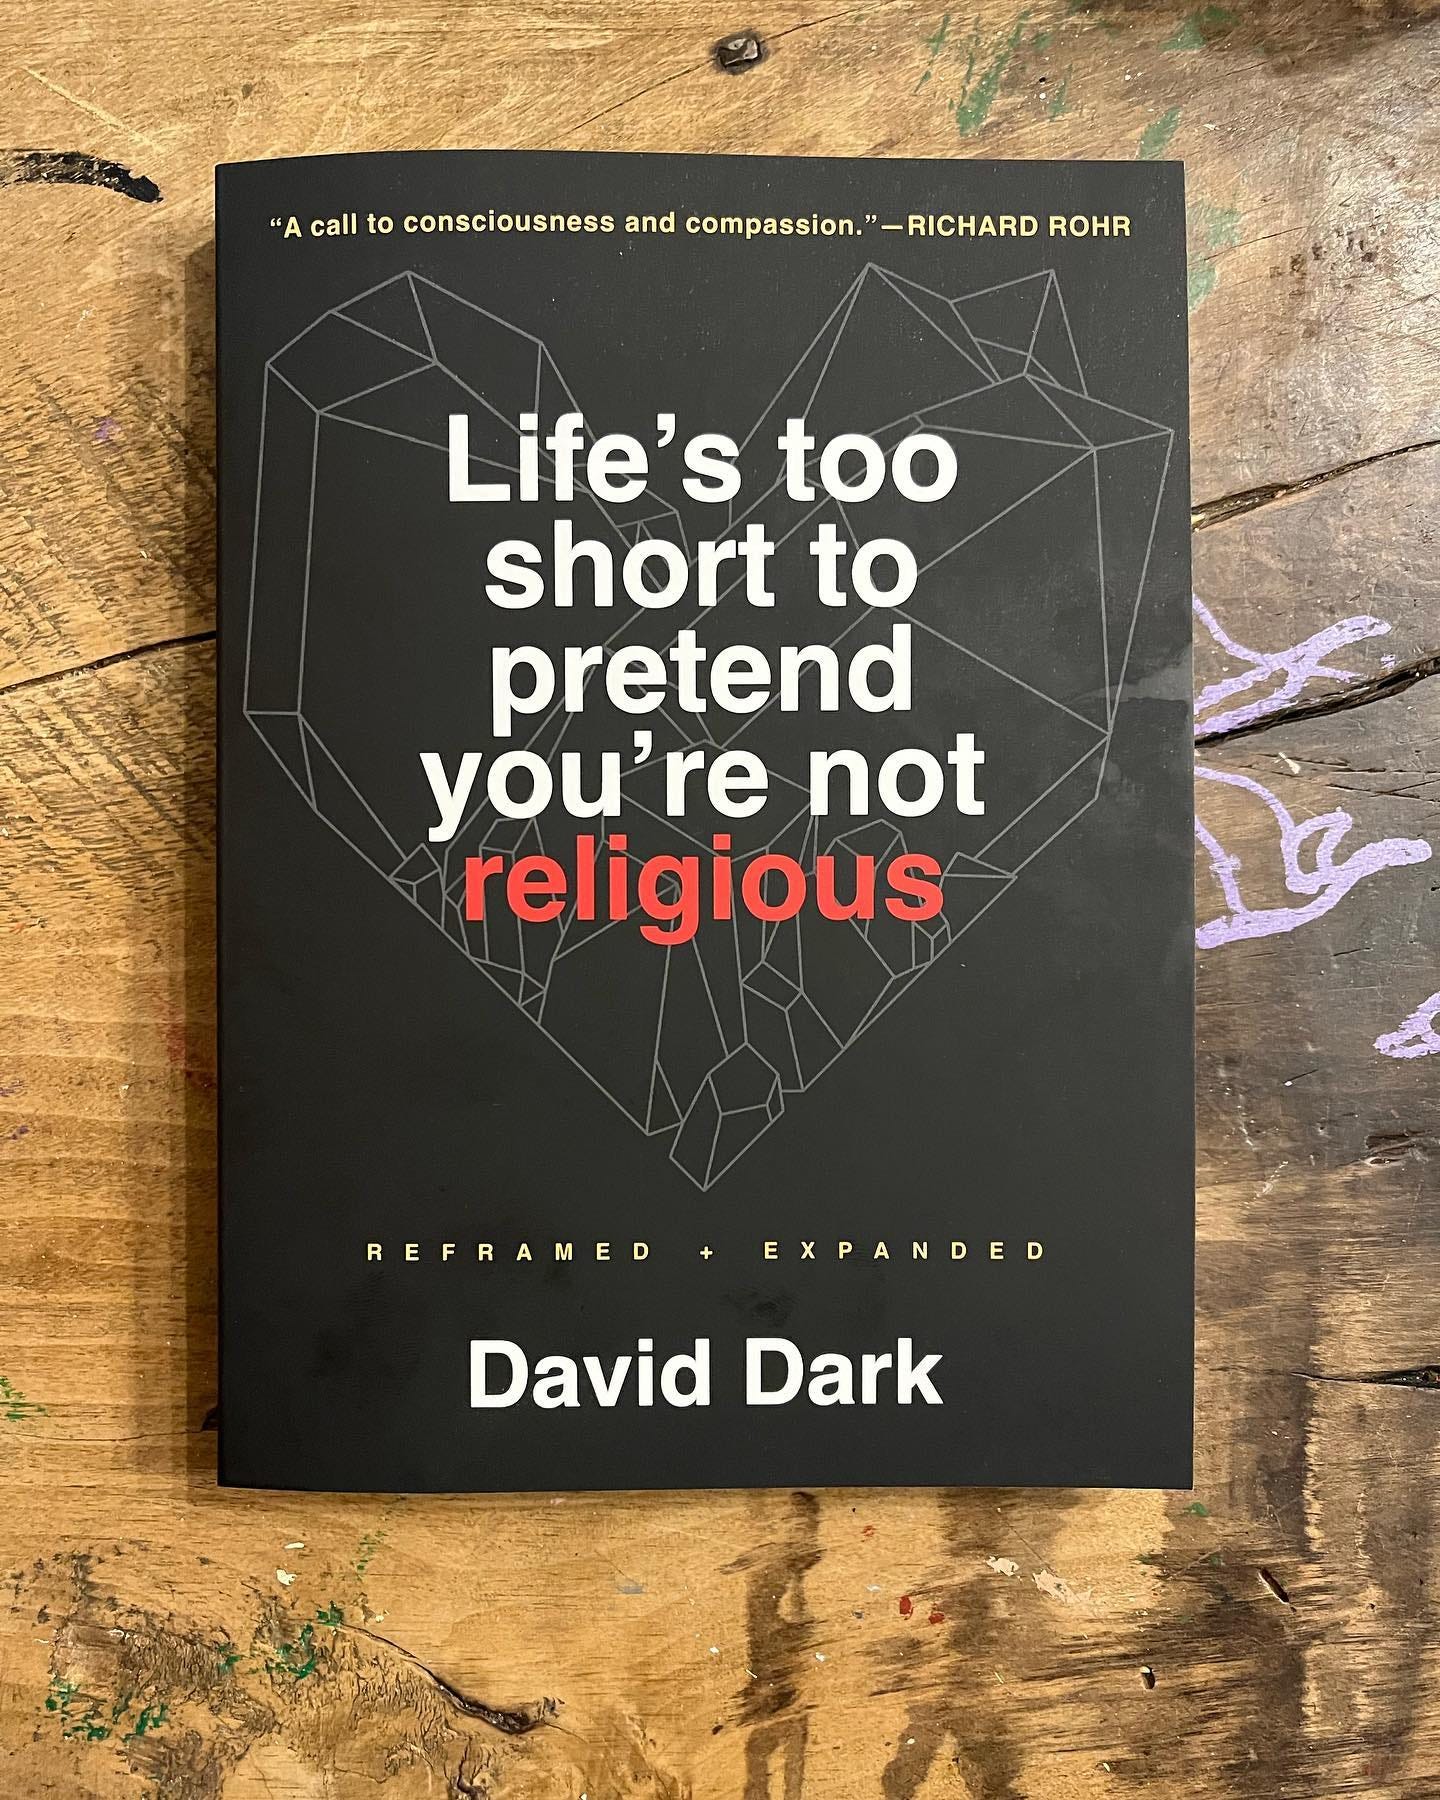 May be an image of book and text that says '"A call to consciousness and compassion." -RICHARD ROHR Life's too short to pretend you're not religious REFRAMED EXPANDED David Dark'